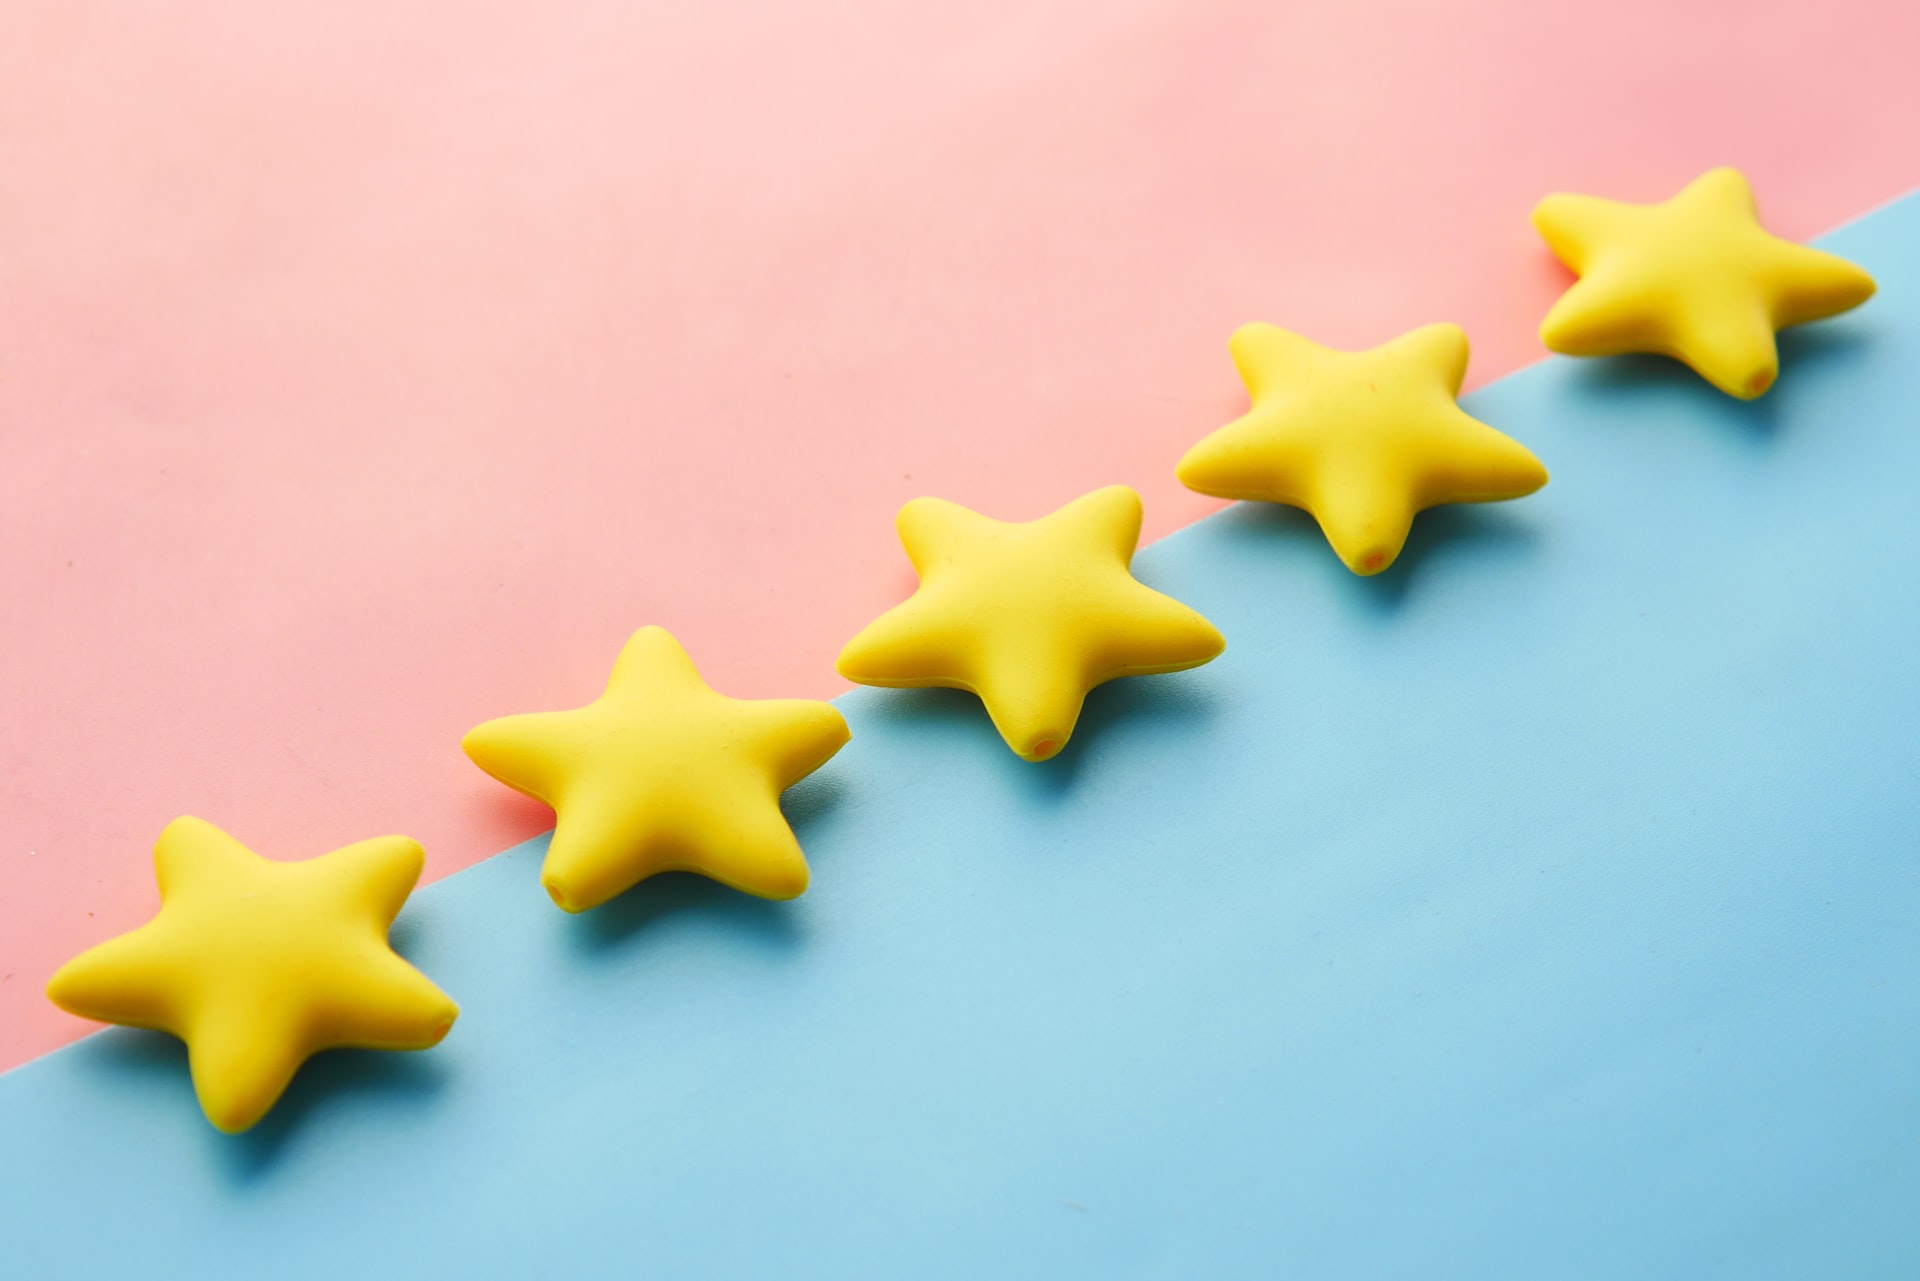 Top 5 Reasons Why Product Ratings & Reviews are Crucial to Ecommerce Success